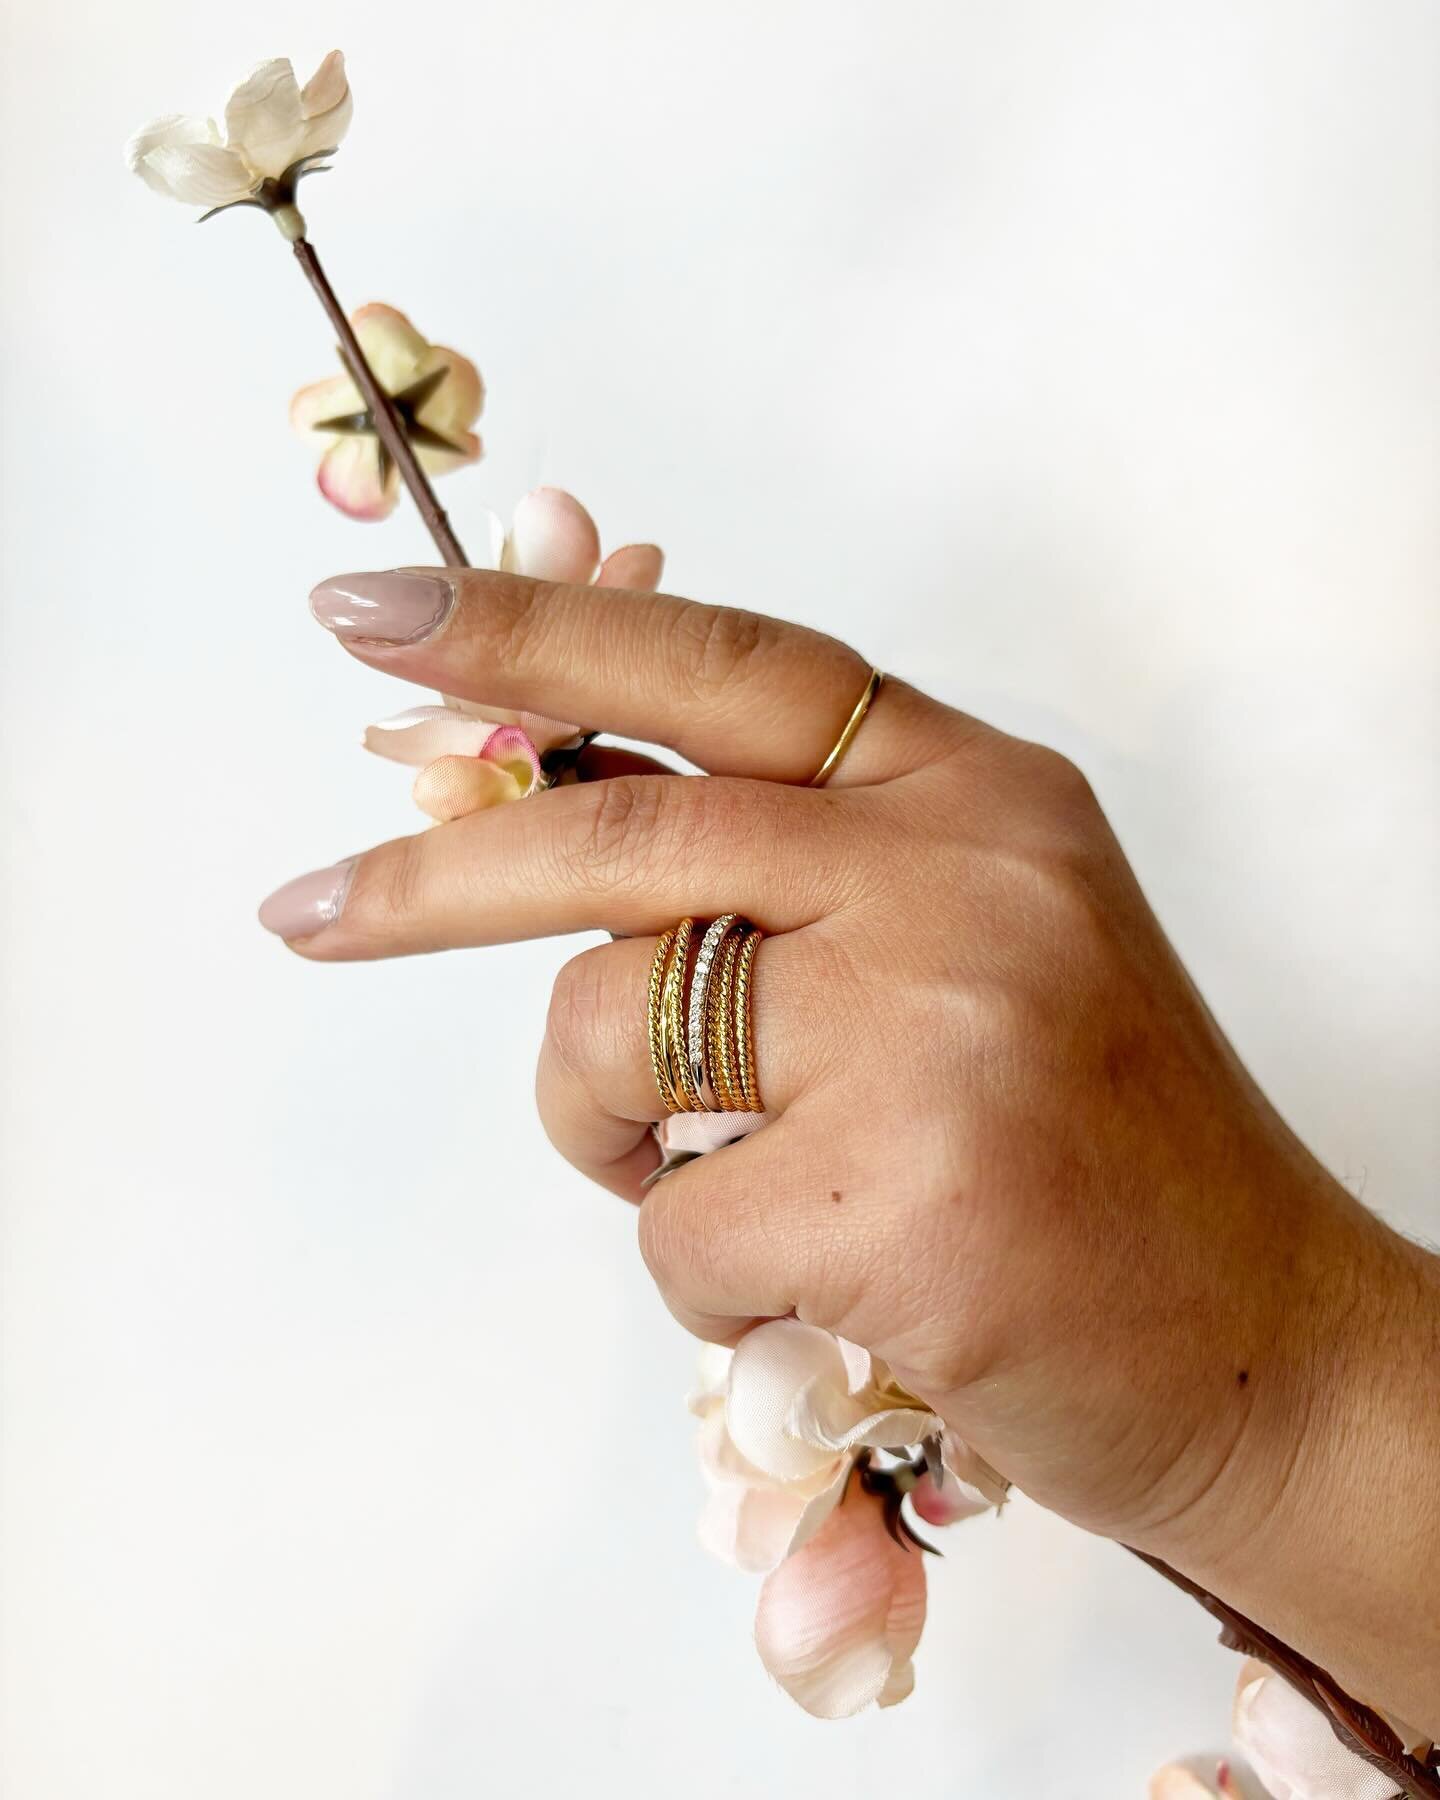 Valentine&rsquo;s Day is less than a week away!
If you are looking for a gift that really shines, we&rsquo;ve got two stunning 18k gold and diamond rings in the shop! The multi band ring is David Yurman, the cluster ring has stunning floral designs o